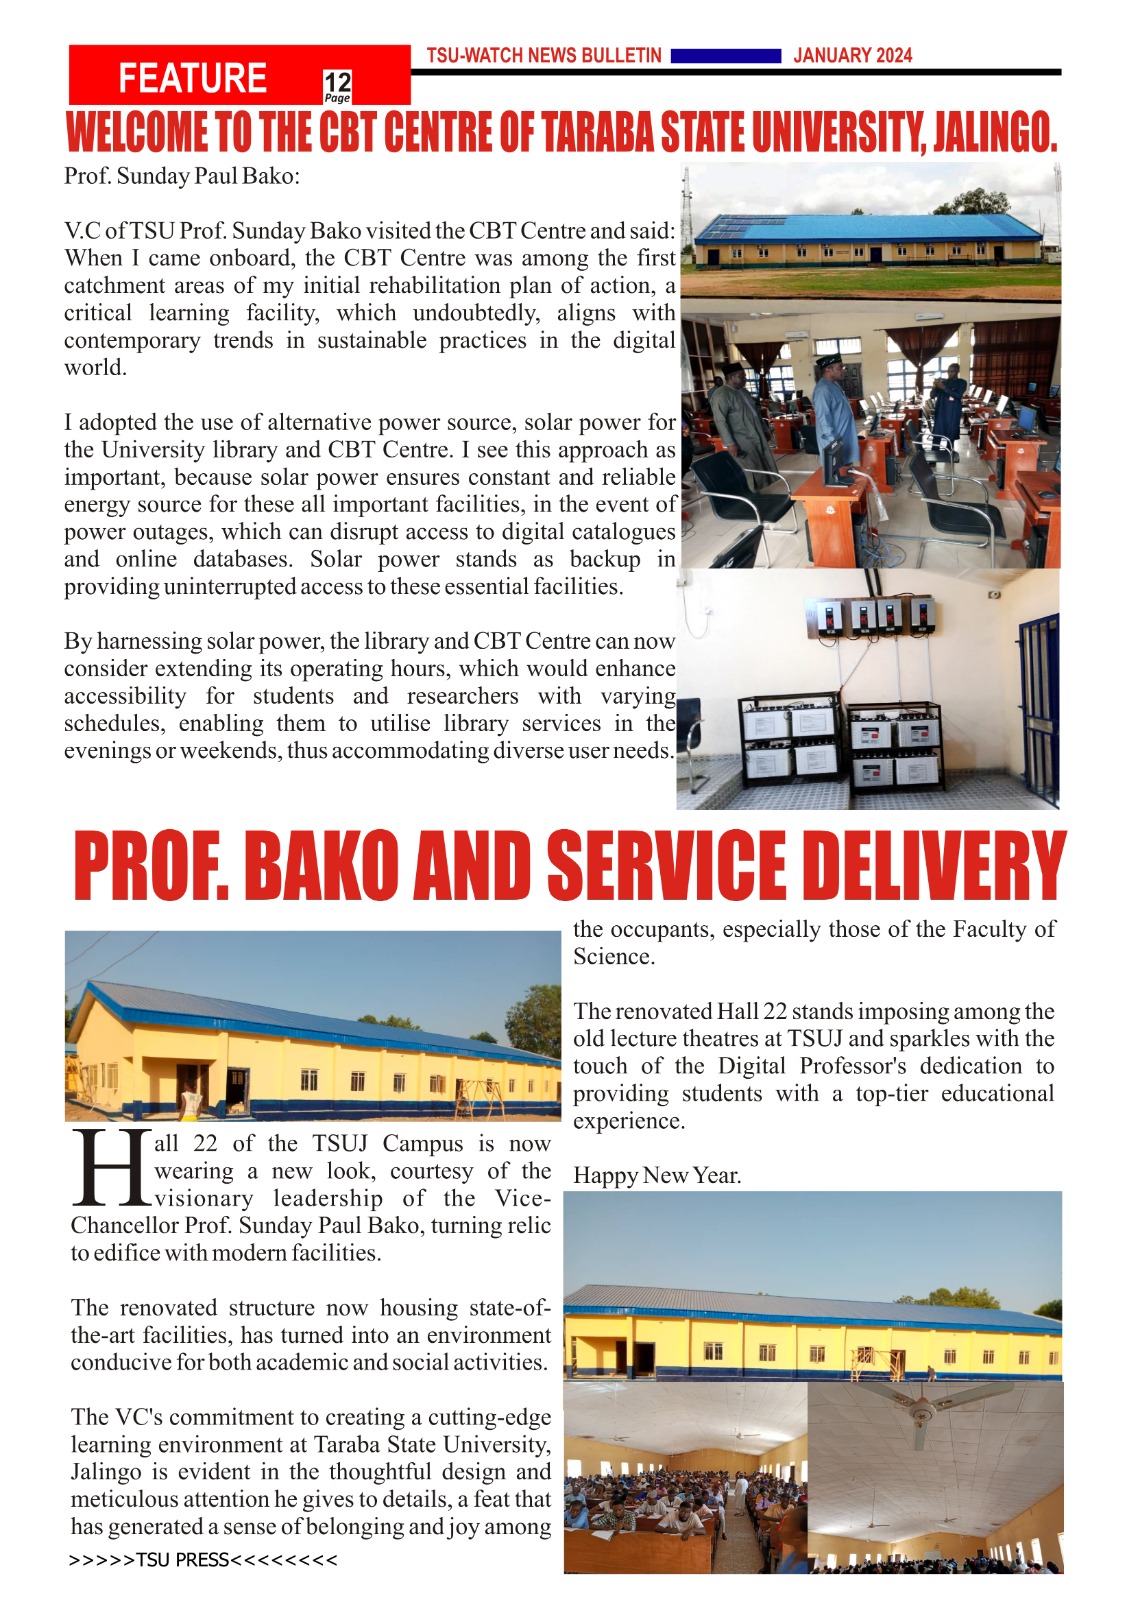 PROF. BAKO AND SERVICE DELIVERY